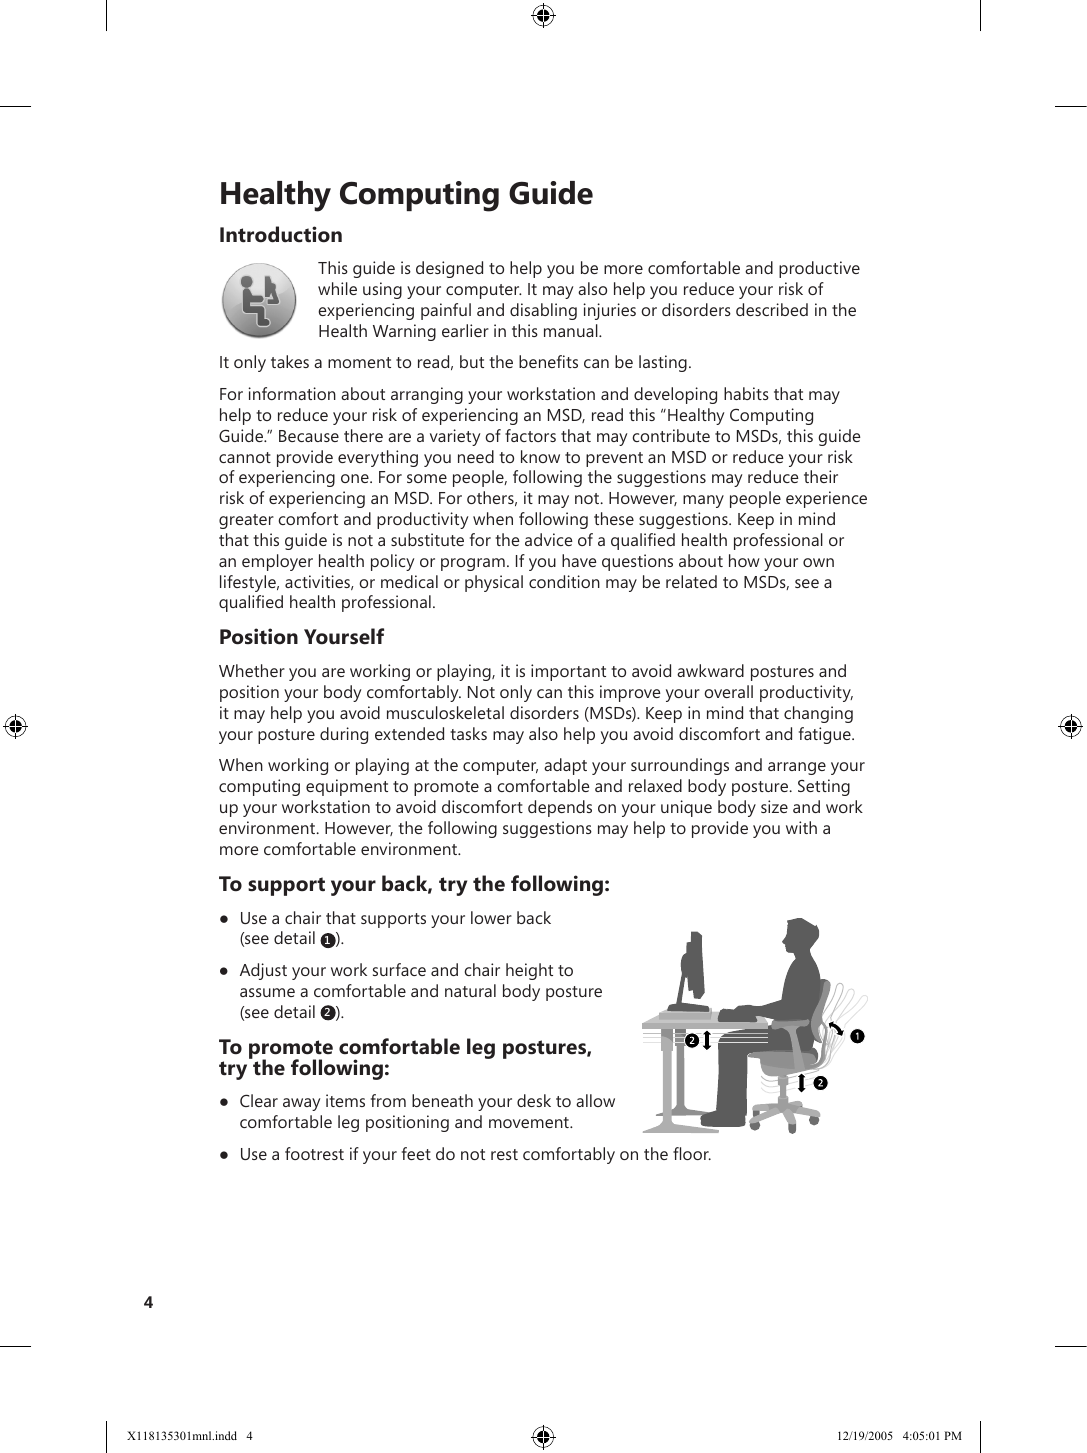     Healthy Computing GuideIntroductionThis guide is designed to help you be more comfortable and productive while using your computer. It may also help you reduce your risk of experiencing painful and disabling injuries or disorders described in the Health Warning earlier in this manual. It only takes a moment to read, but the benets can be lasting.For information about arranging your workstation and developing habits that may help to reduce your risk of experiencing an MSD, read this “Healthy Computing Guide.” Because there are a variety of factors that may contribute to MSDs, this guide cannot provide everything you need to know to prevent an MSD or reduce your risk of experiencing one. For some people, following the suggestions may reduce their risk of experiencing an MSD. For others, it may not. However, many people experience greater comfort and productivity when following these suggestions. Keep in mind that this guide is not a substitute for the advice of a qualied health professional or an employer health policy or program. If you have questions about how your own lifestyle, activities, or medical or physical condition may be related to MSDs, see a qualied health professional.Position YourselfWhether you are working or playing, it is important to avoid awkward postures and position your body comfortably. Not only can this improve your overall productivity, it may help you avoid musculoskeletal disorders (MSDs). Keep in mind that changing your posture during extended tasks may also help you avoid discomfort and fatigue. When working or playing at the computer, adapt your surroundings and arrange your computing equipment to promote a comfortable and relaxed body posture. Setting up your workstation to avoid discomfort depends on your unique body size and work environment. However, the following suggestions may help to provide you with a more comfortable environment. To support your back, try the following:●  Use a chair that supports your lower back  (see detail  1).●  Adjust your work surface and chair height to assume a comfortable and natural body posture (see detail  2).To promote comfortable leg postures,  try the following:●  Clear away items from beneath your desk to allow comfortable leg positioning and movement.●  Use a footrest if your feet do not rest comfortably on the oor.4X118135301mnl.indd   4 12/19/2005   4:05:01 PM